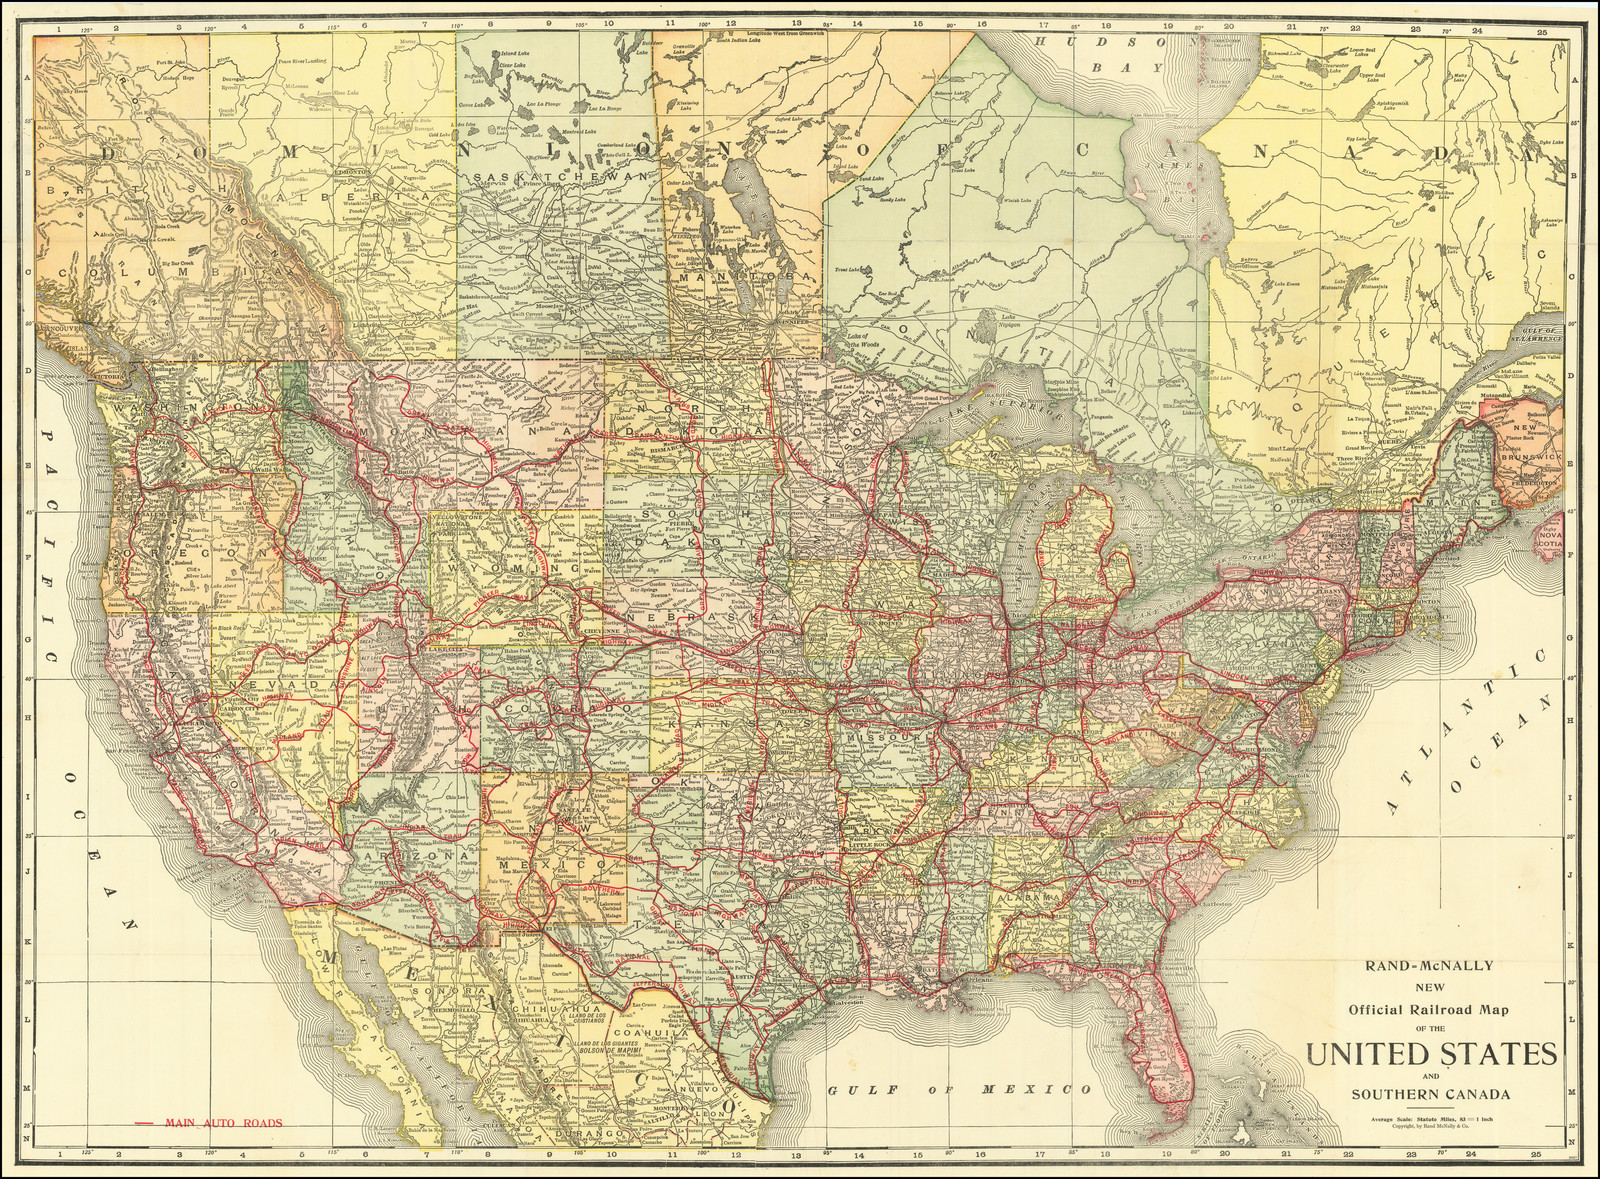 National Auto Trail Map Rand Mcnally New Official Railroad Map Of The My Xxx Hot Girl 6382